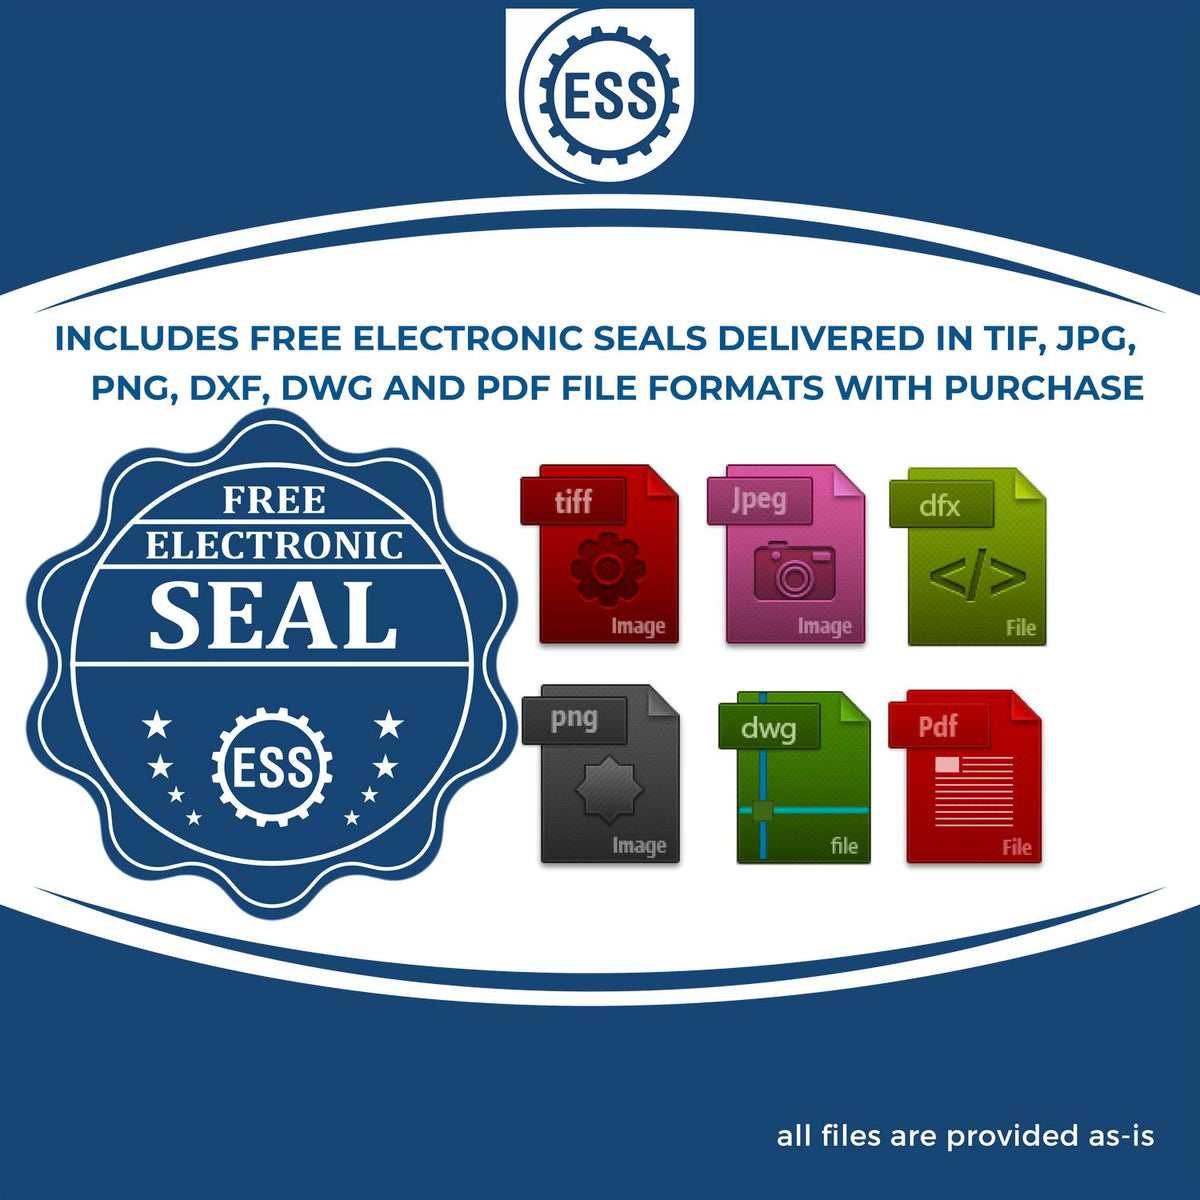 An infographic for the free electronic seal for the Gift Alaska Land Surveyor Seal illustrating the different file type icons such as DXF, DWG, TIF, JPG and PNG.